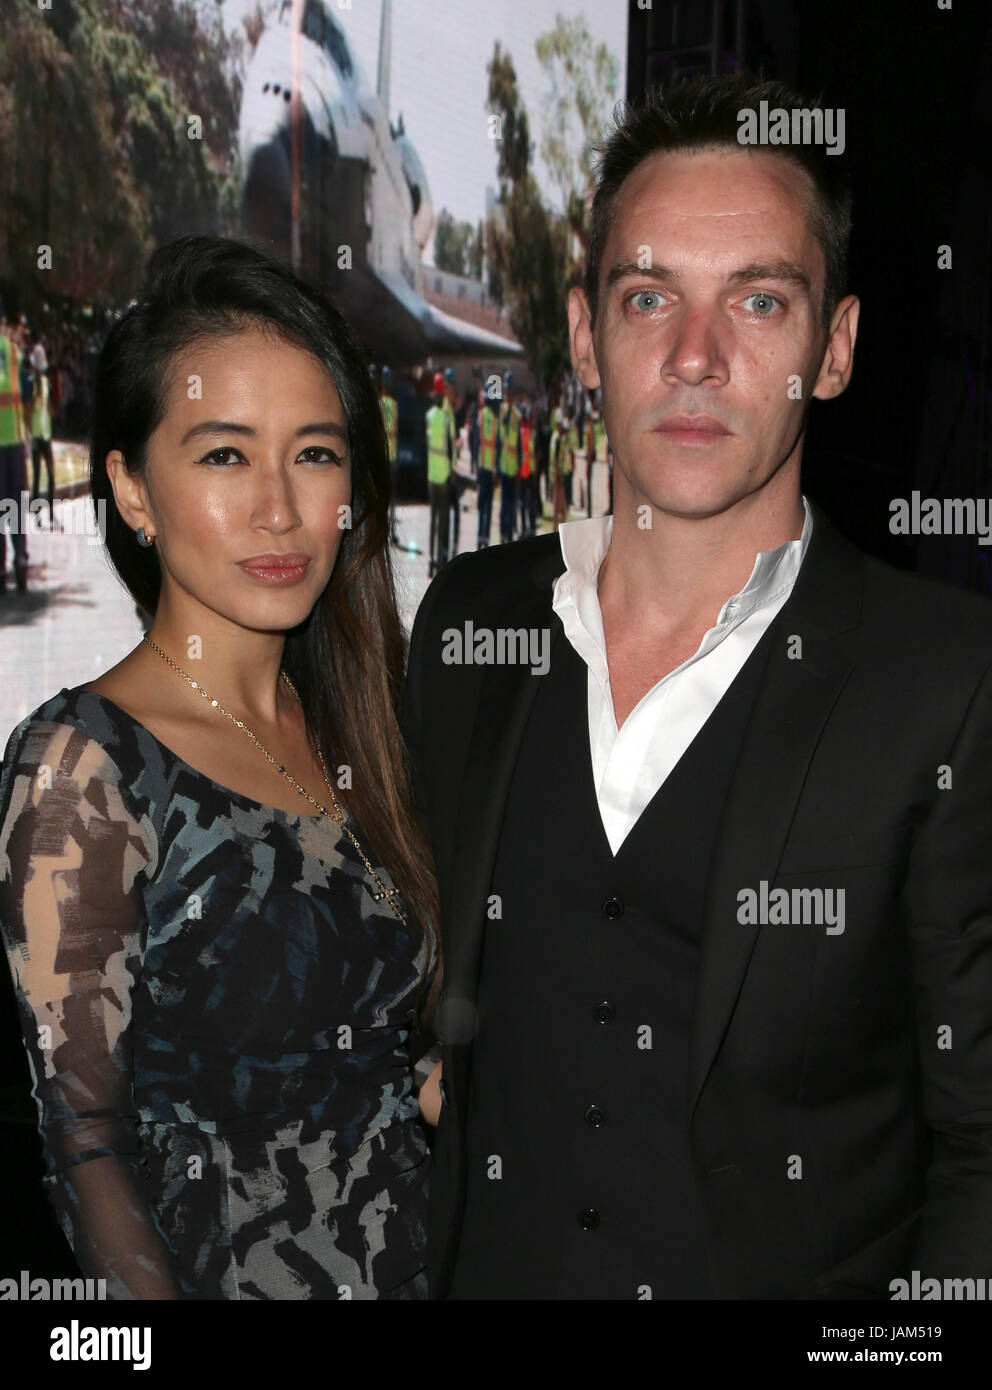 Angel Flight West's Annual Endeavor Awards  Featuring: Mara Lane, Jonathan Rhys Meyers Where: Los Angeles, California, United States When: 06 May 2017 Credit: FayesVision/WENN.com Stock Photo